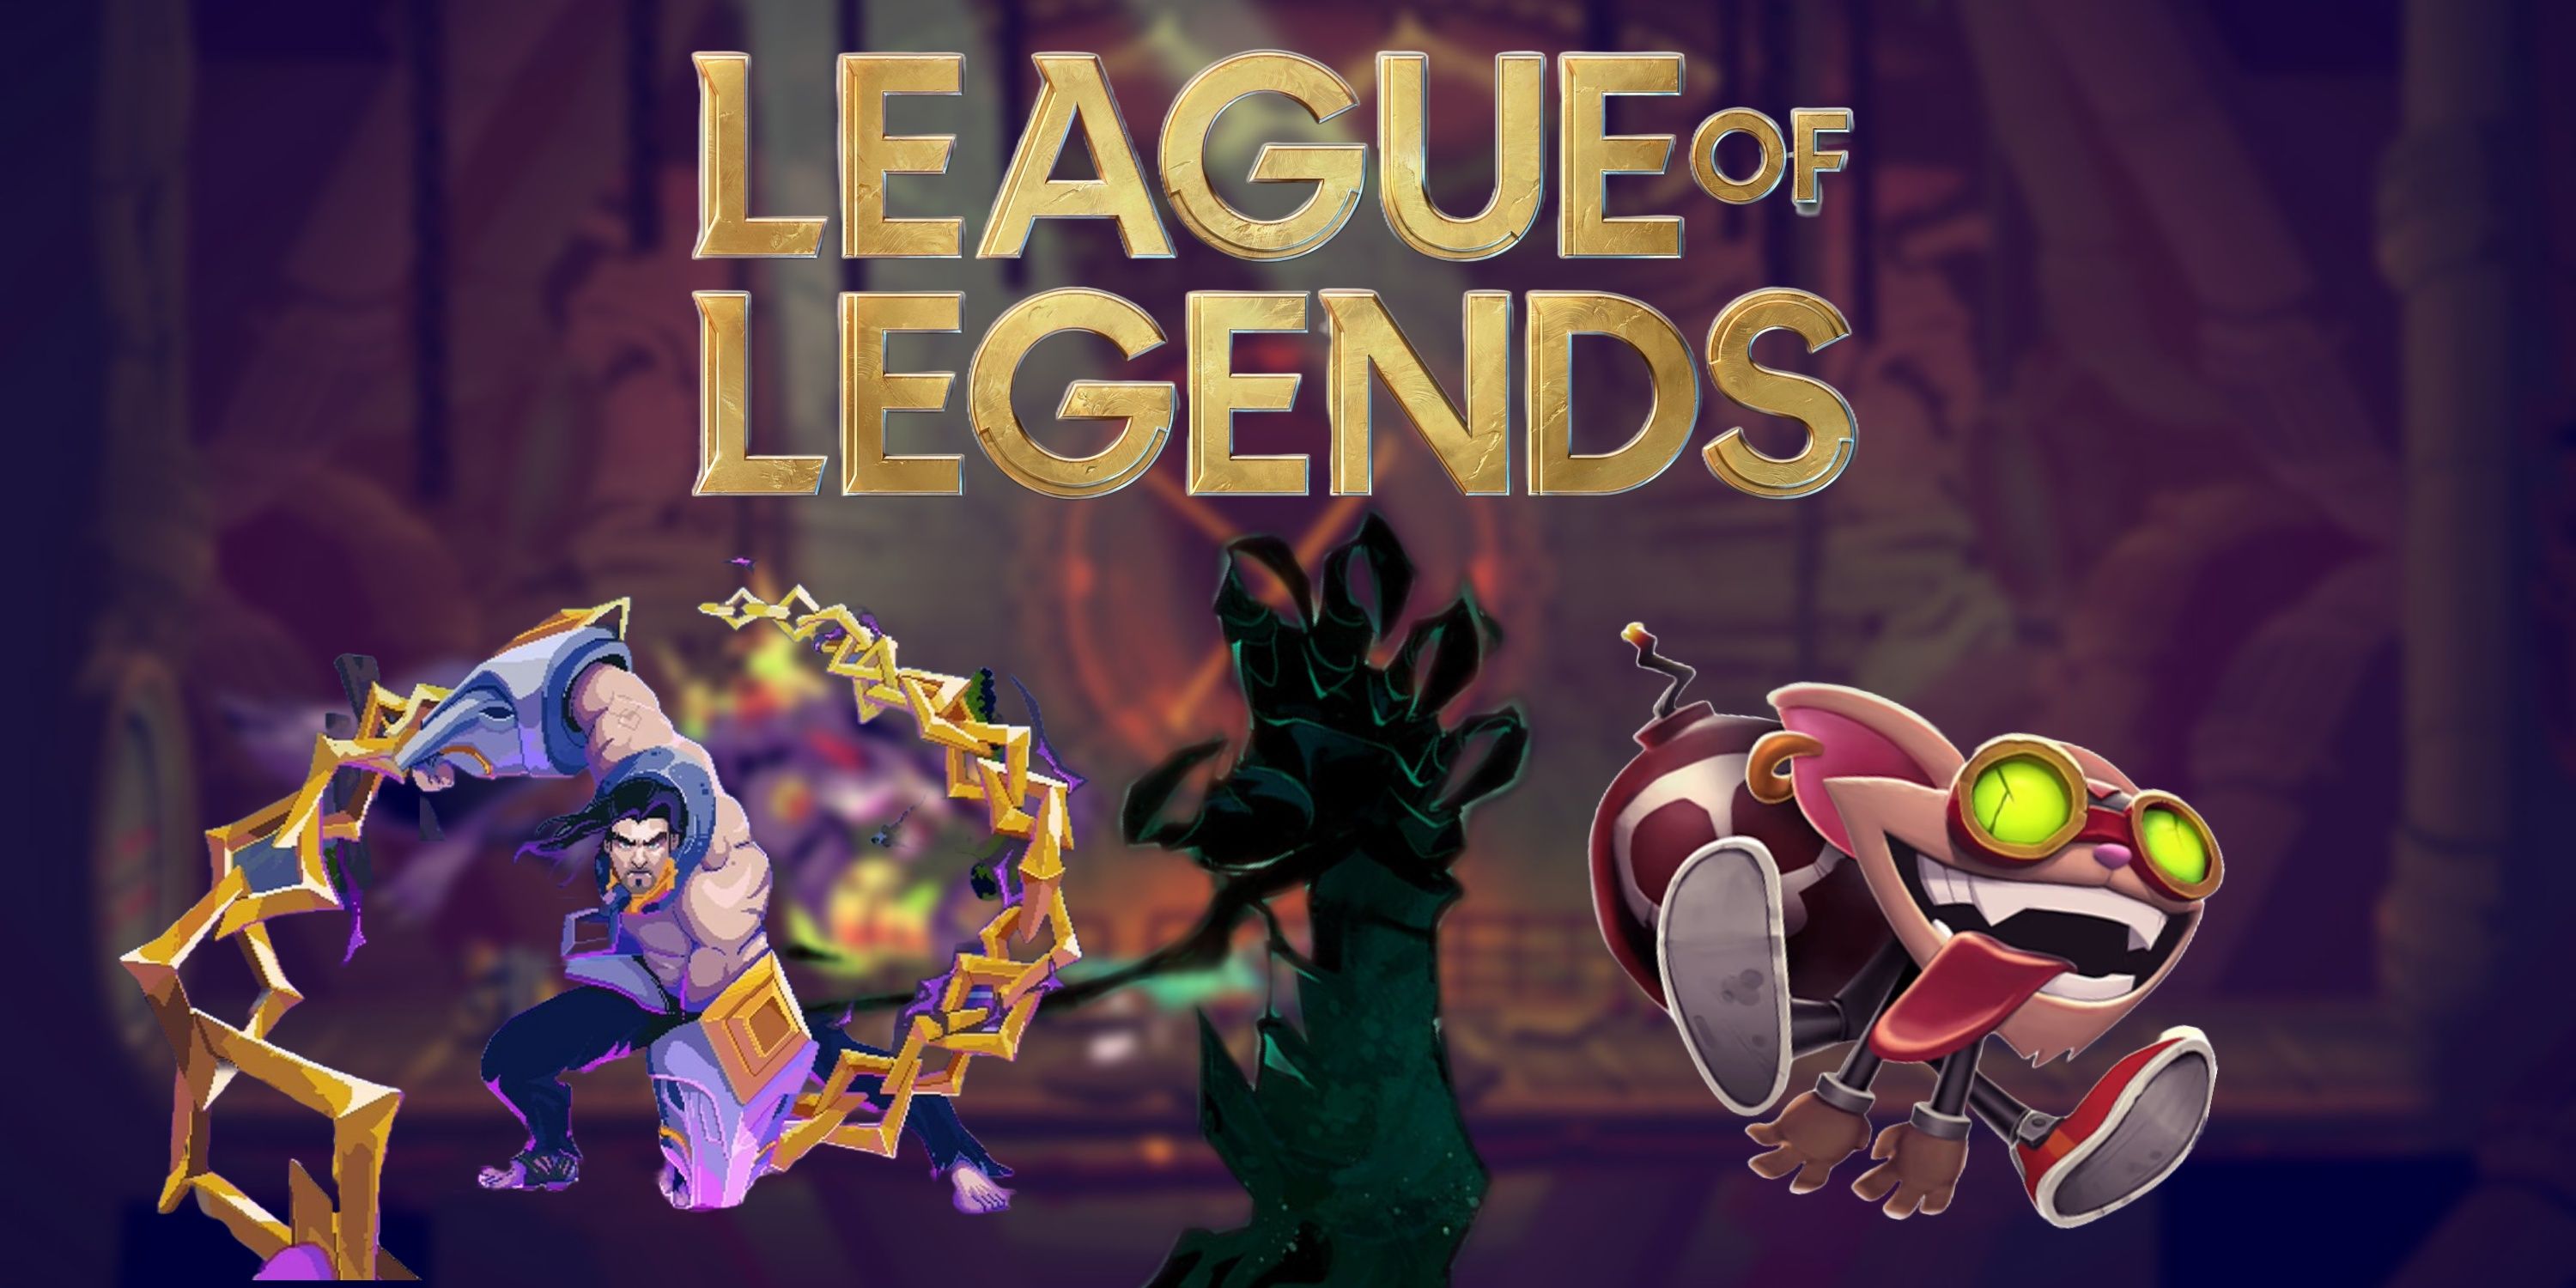 Every Game By Riot Games, Ranked (Featured Image) - The Mageseeker, League Of Legends, Hextech Mayhem + Blurred screenshot of Convergence